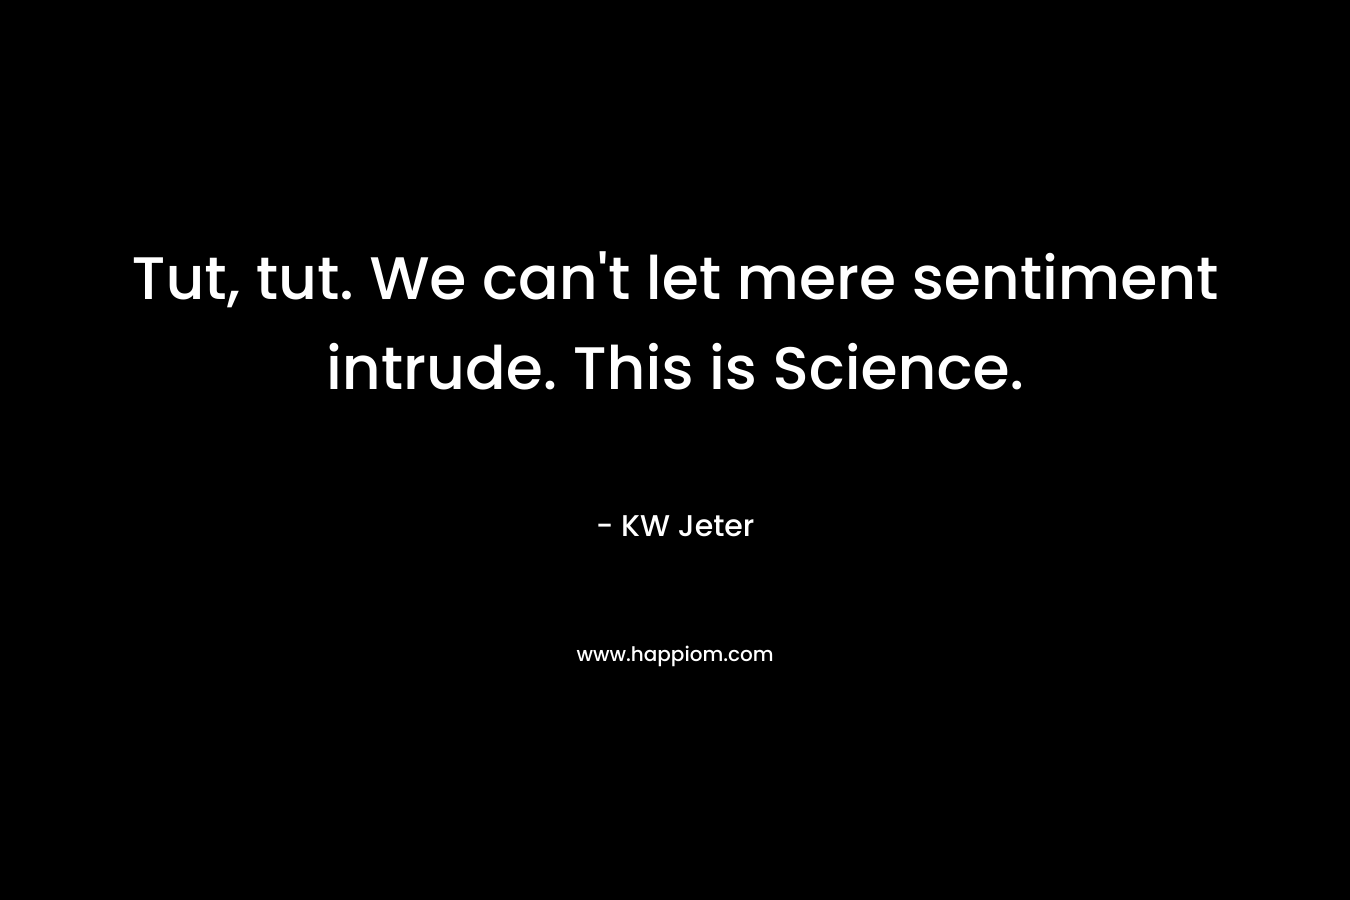 Tut, tut. We can’t let mere sentiment intrude. This is Science. – KW Jeter